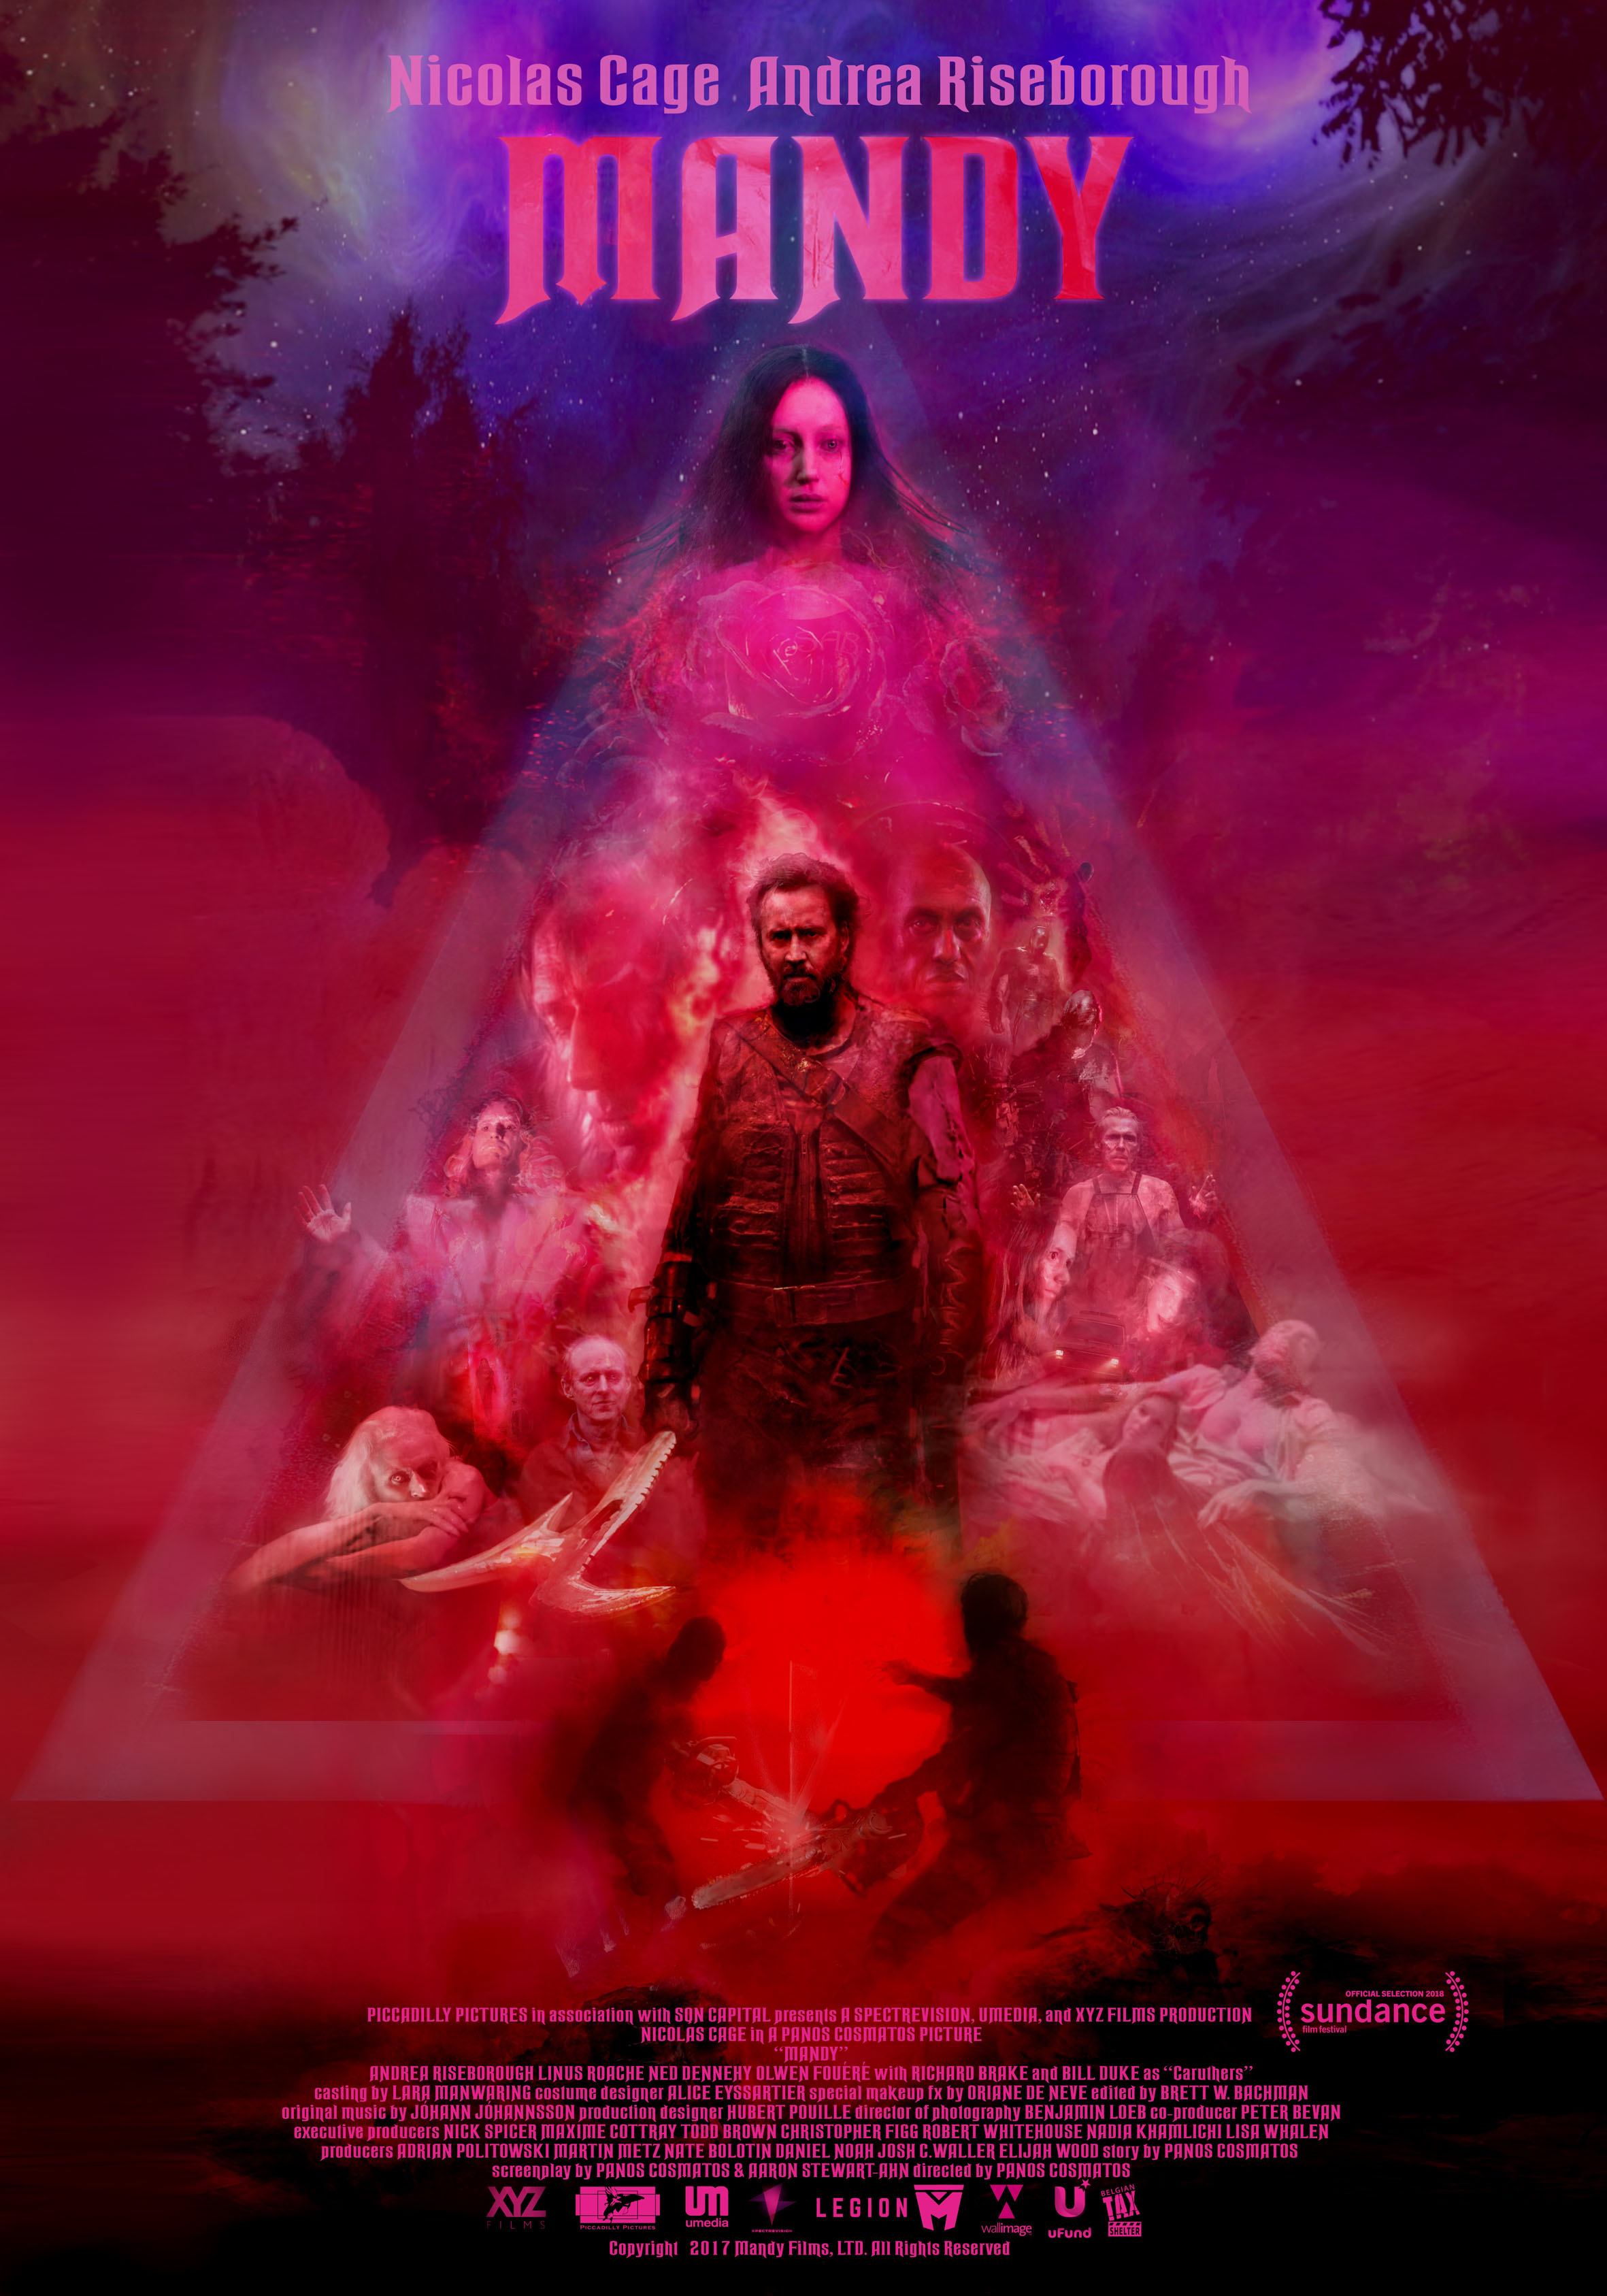 Mandy film review Cannes 2018: Nicolas Cage is on top form in dazzling revenge movie